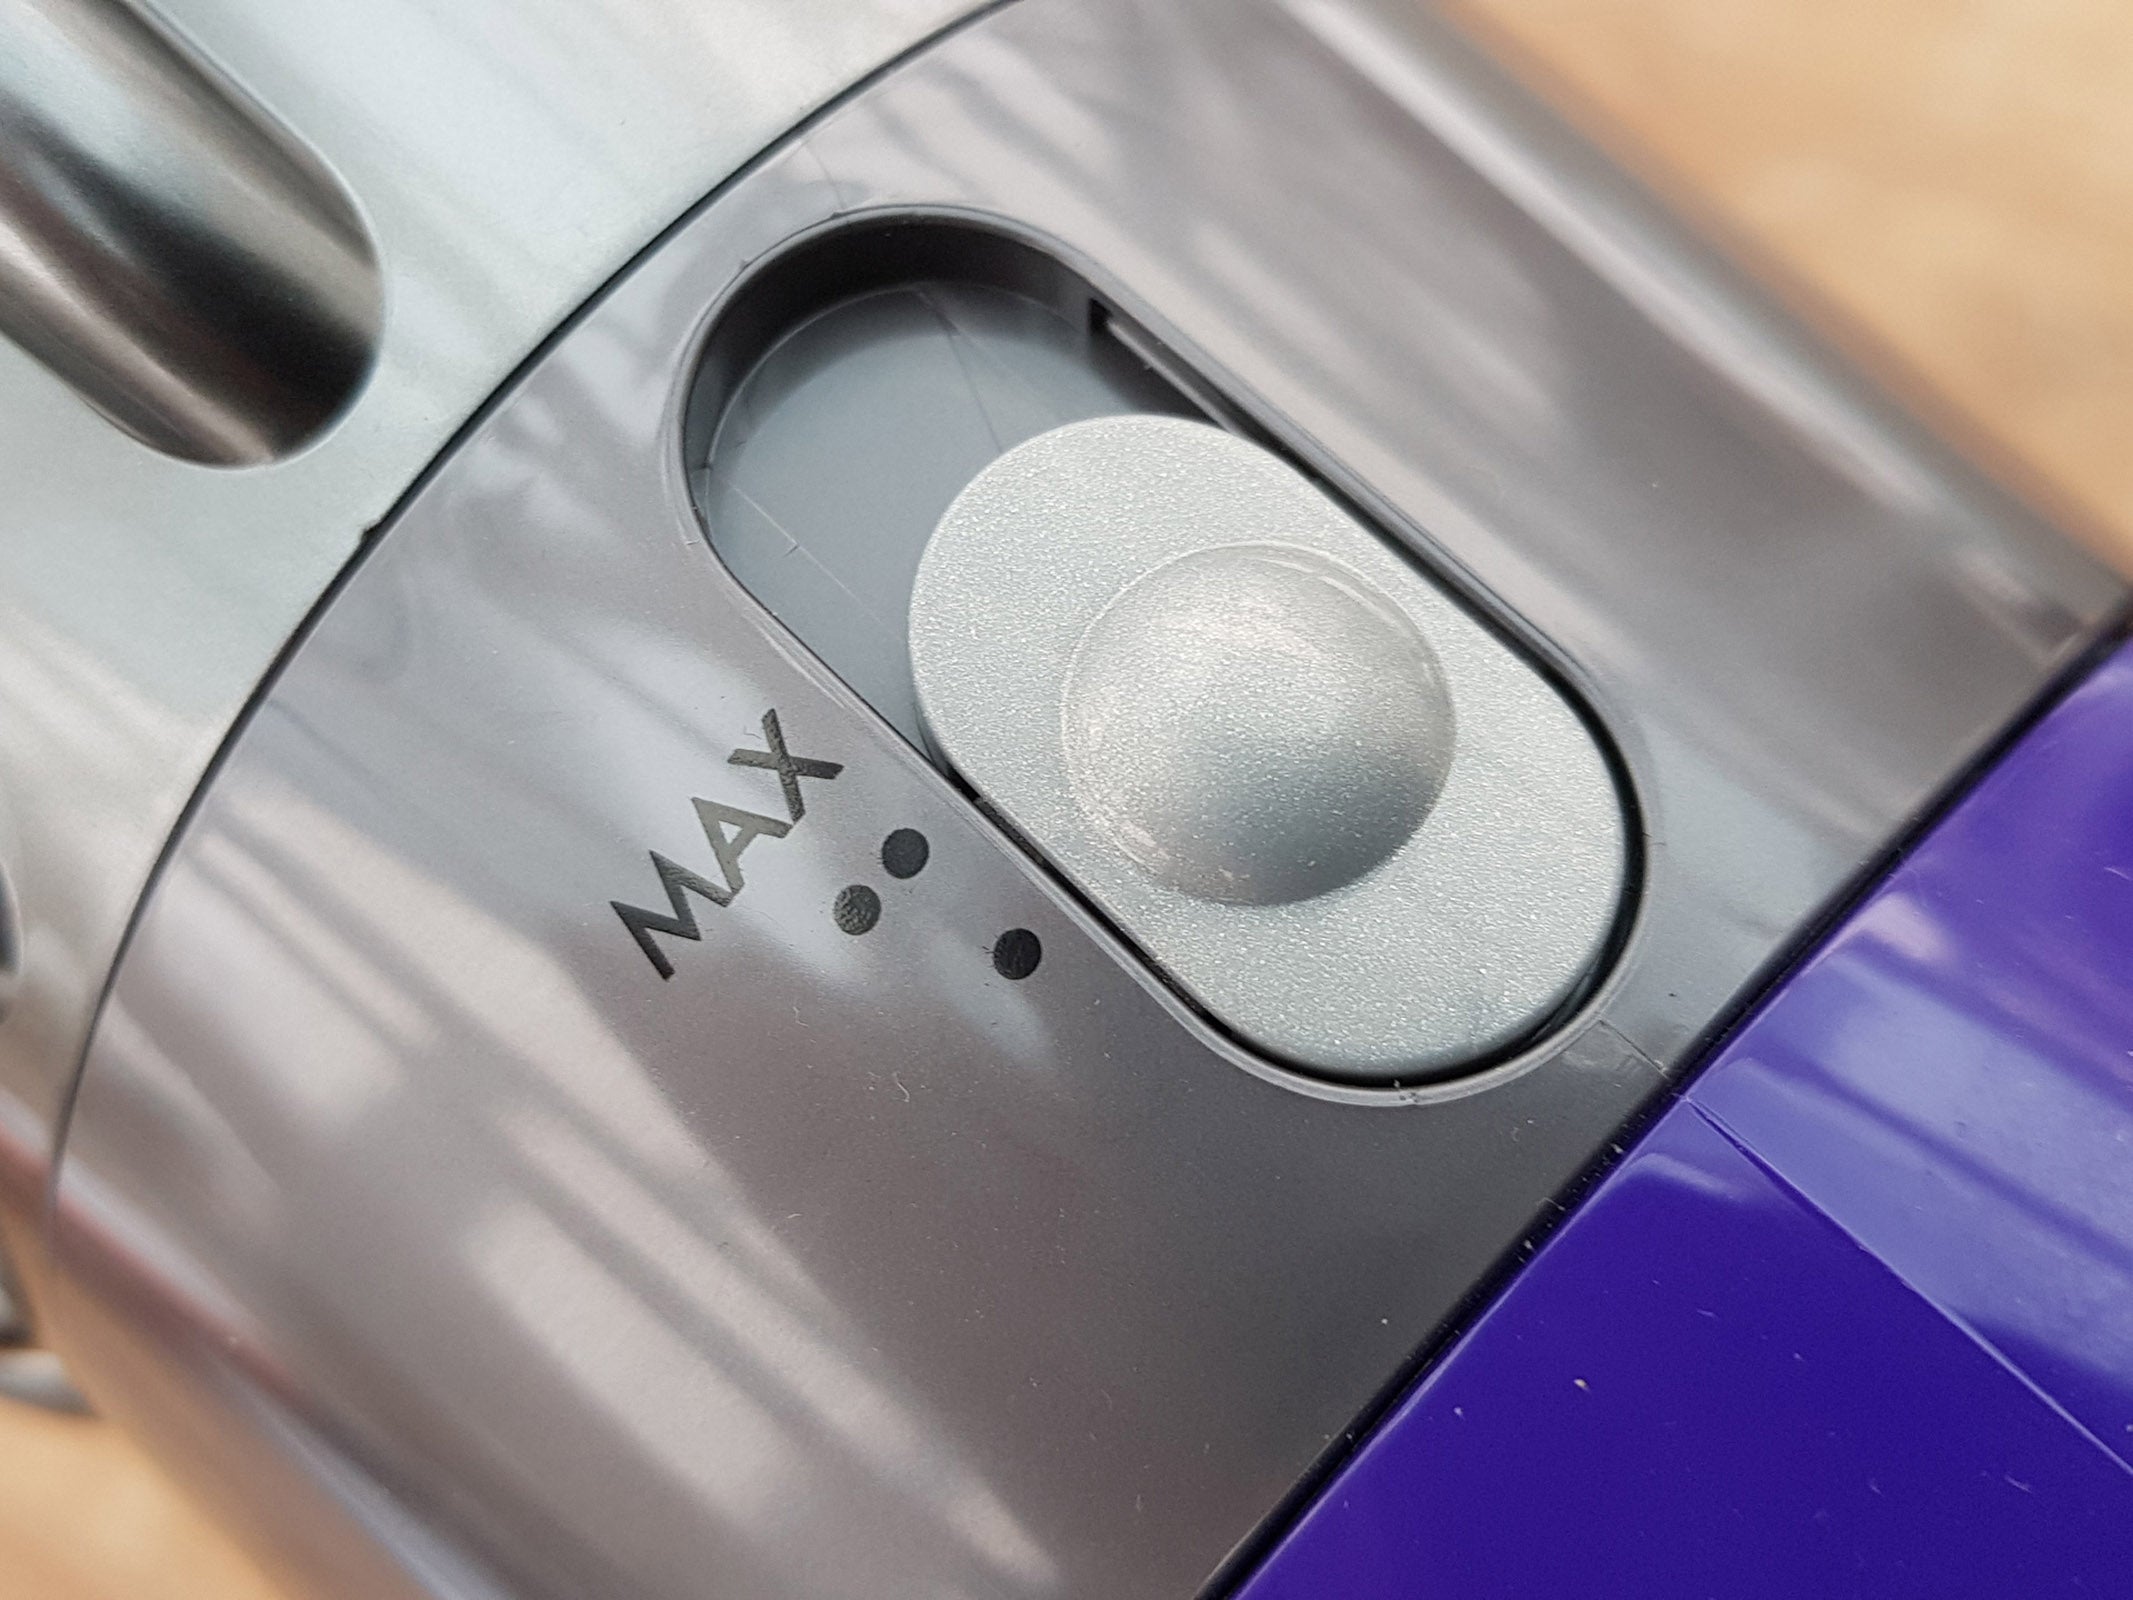 Close-up of Dyson V10 vacuum cleaner's Max power button.